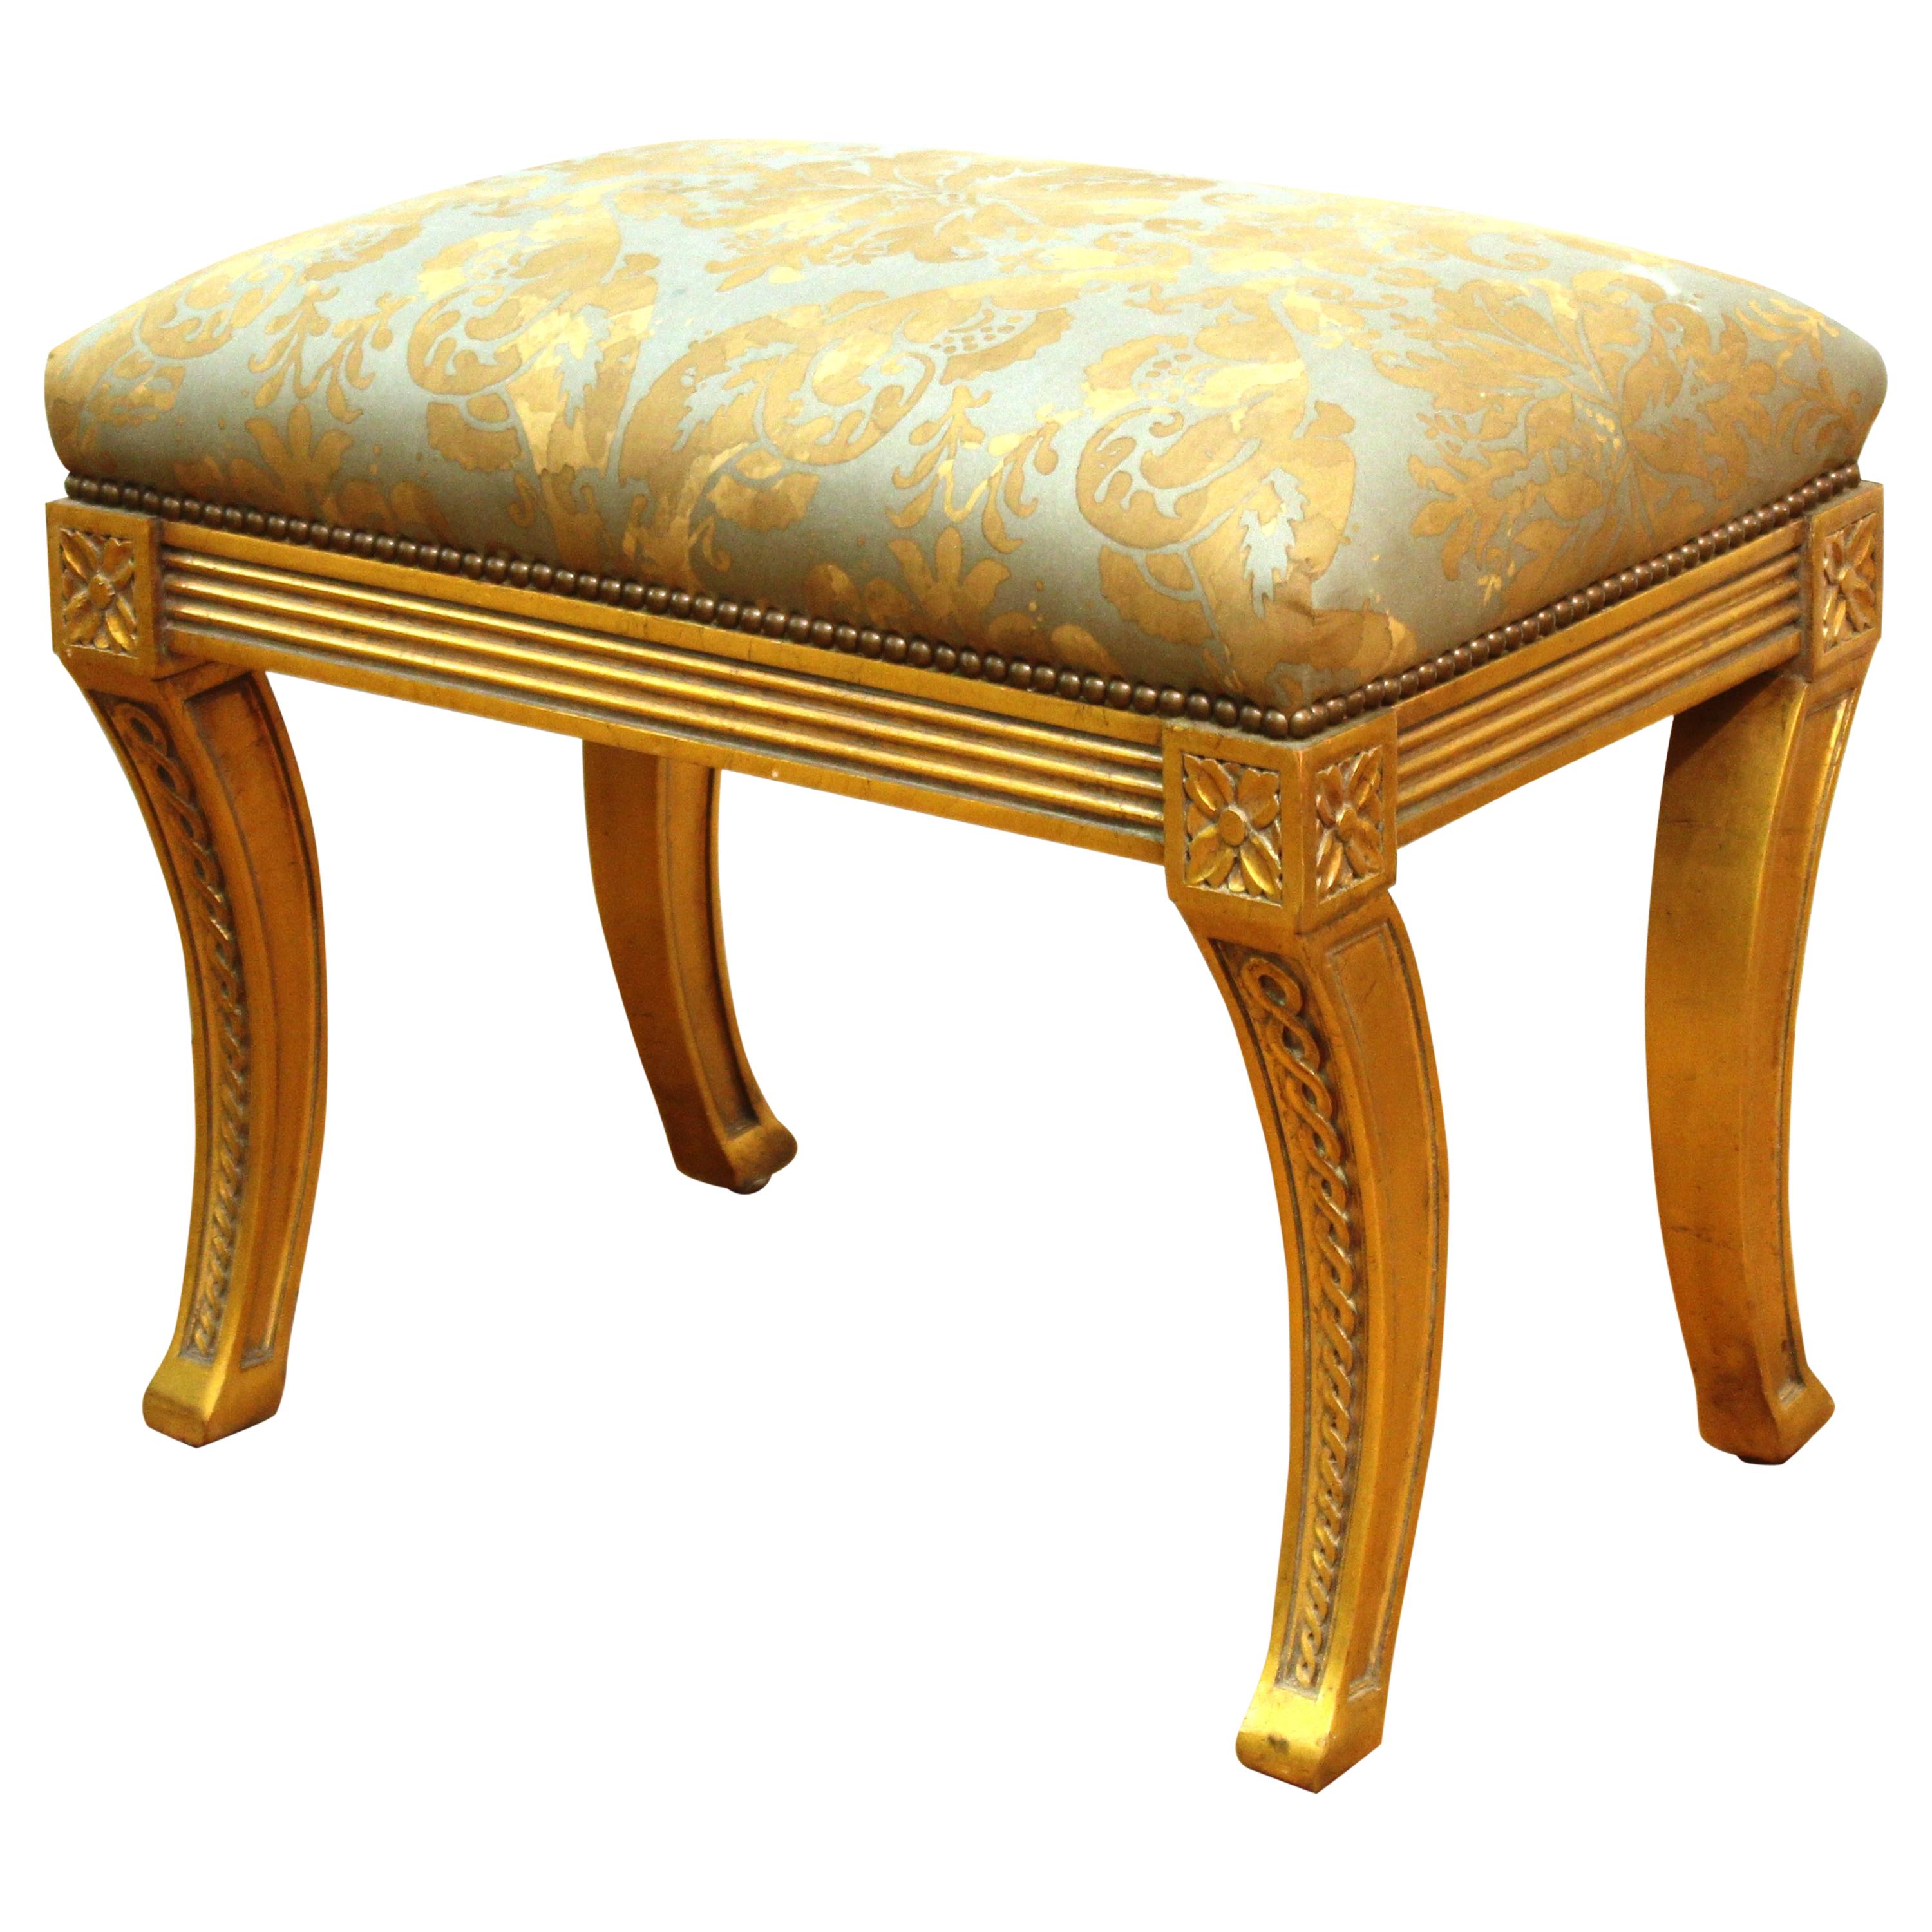 Neoclassical Revival Style Giltwood Bench For Sale